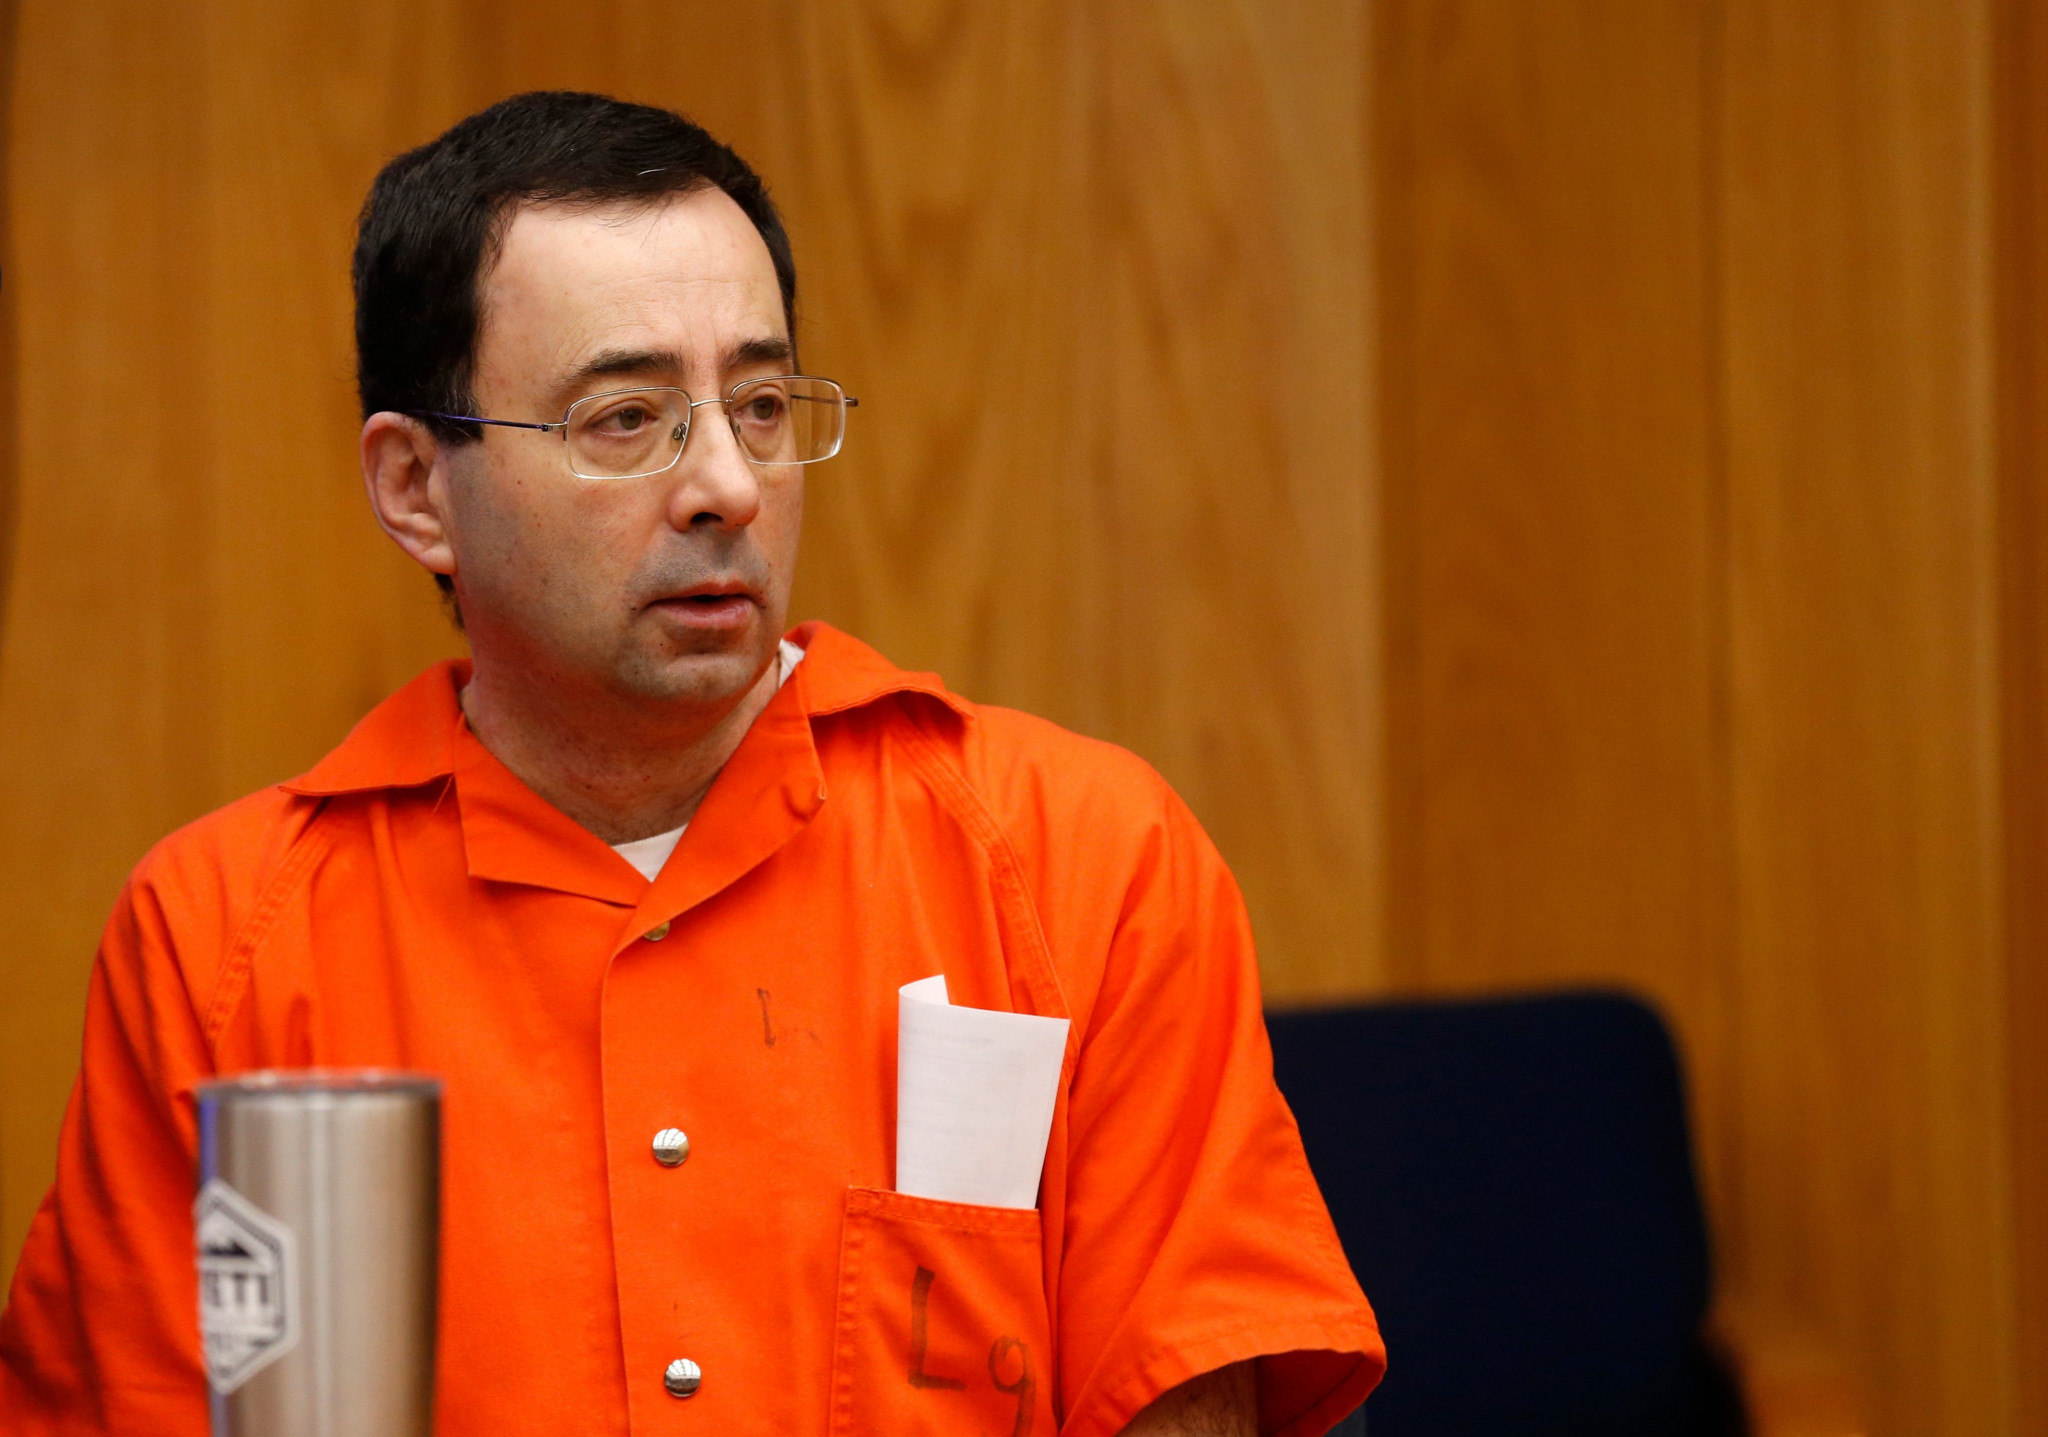 USA Gymnastics are still attempting to recover from the scandal involving former team doctor Larry Nassar ©Getty Images